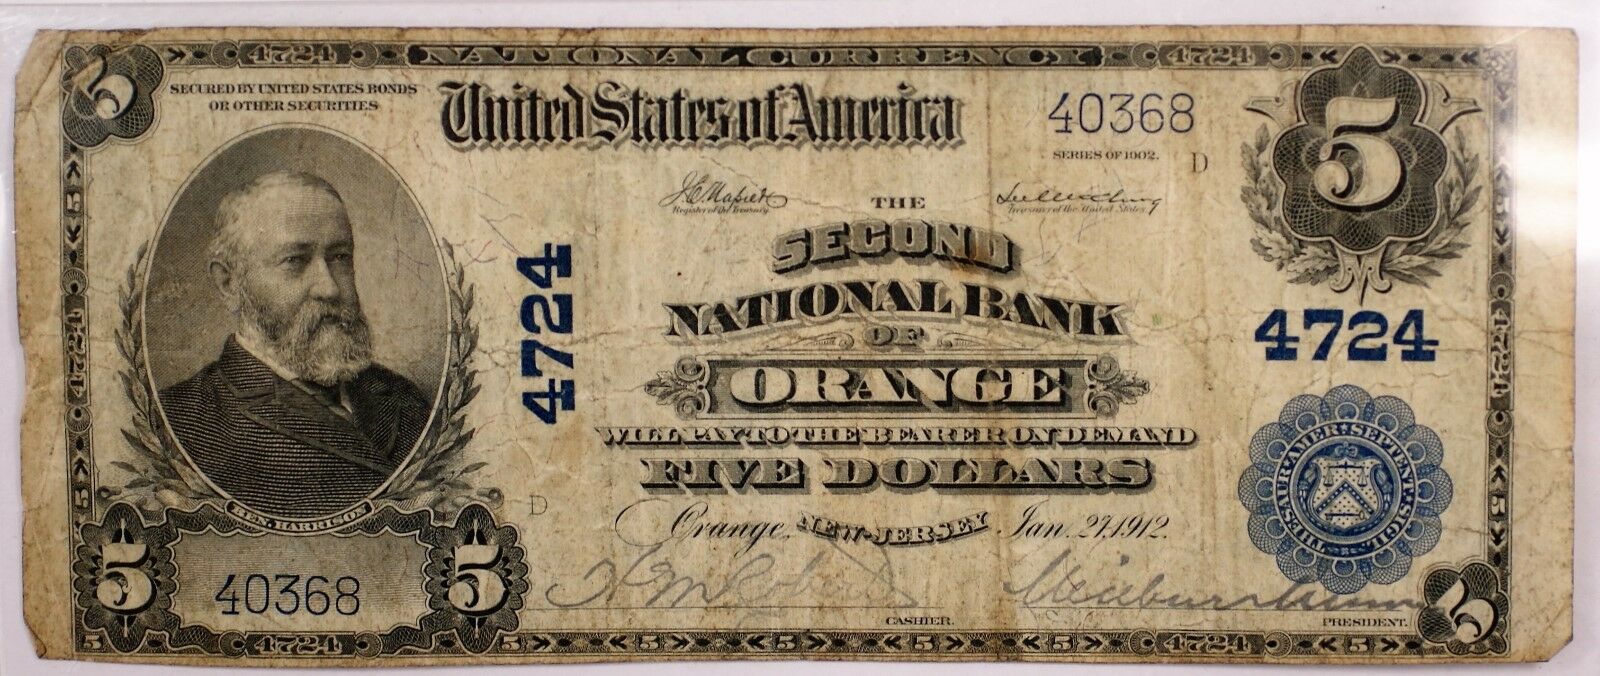 1902 National Banknote Second National Bank Orange New Jersey CH# 4724